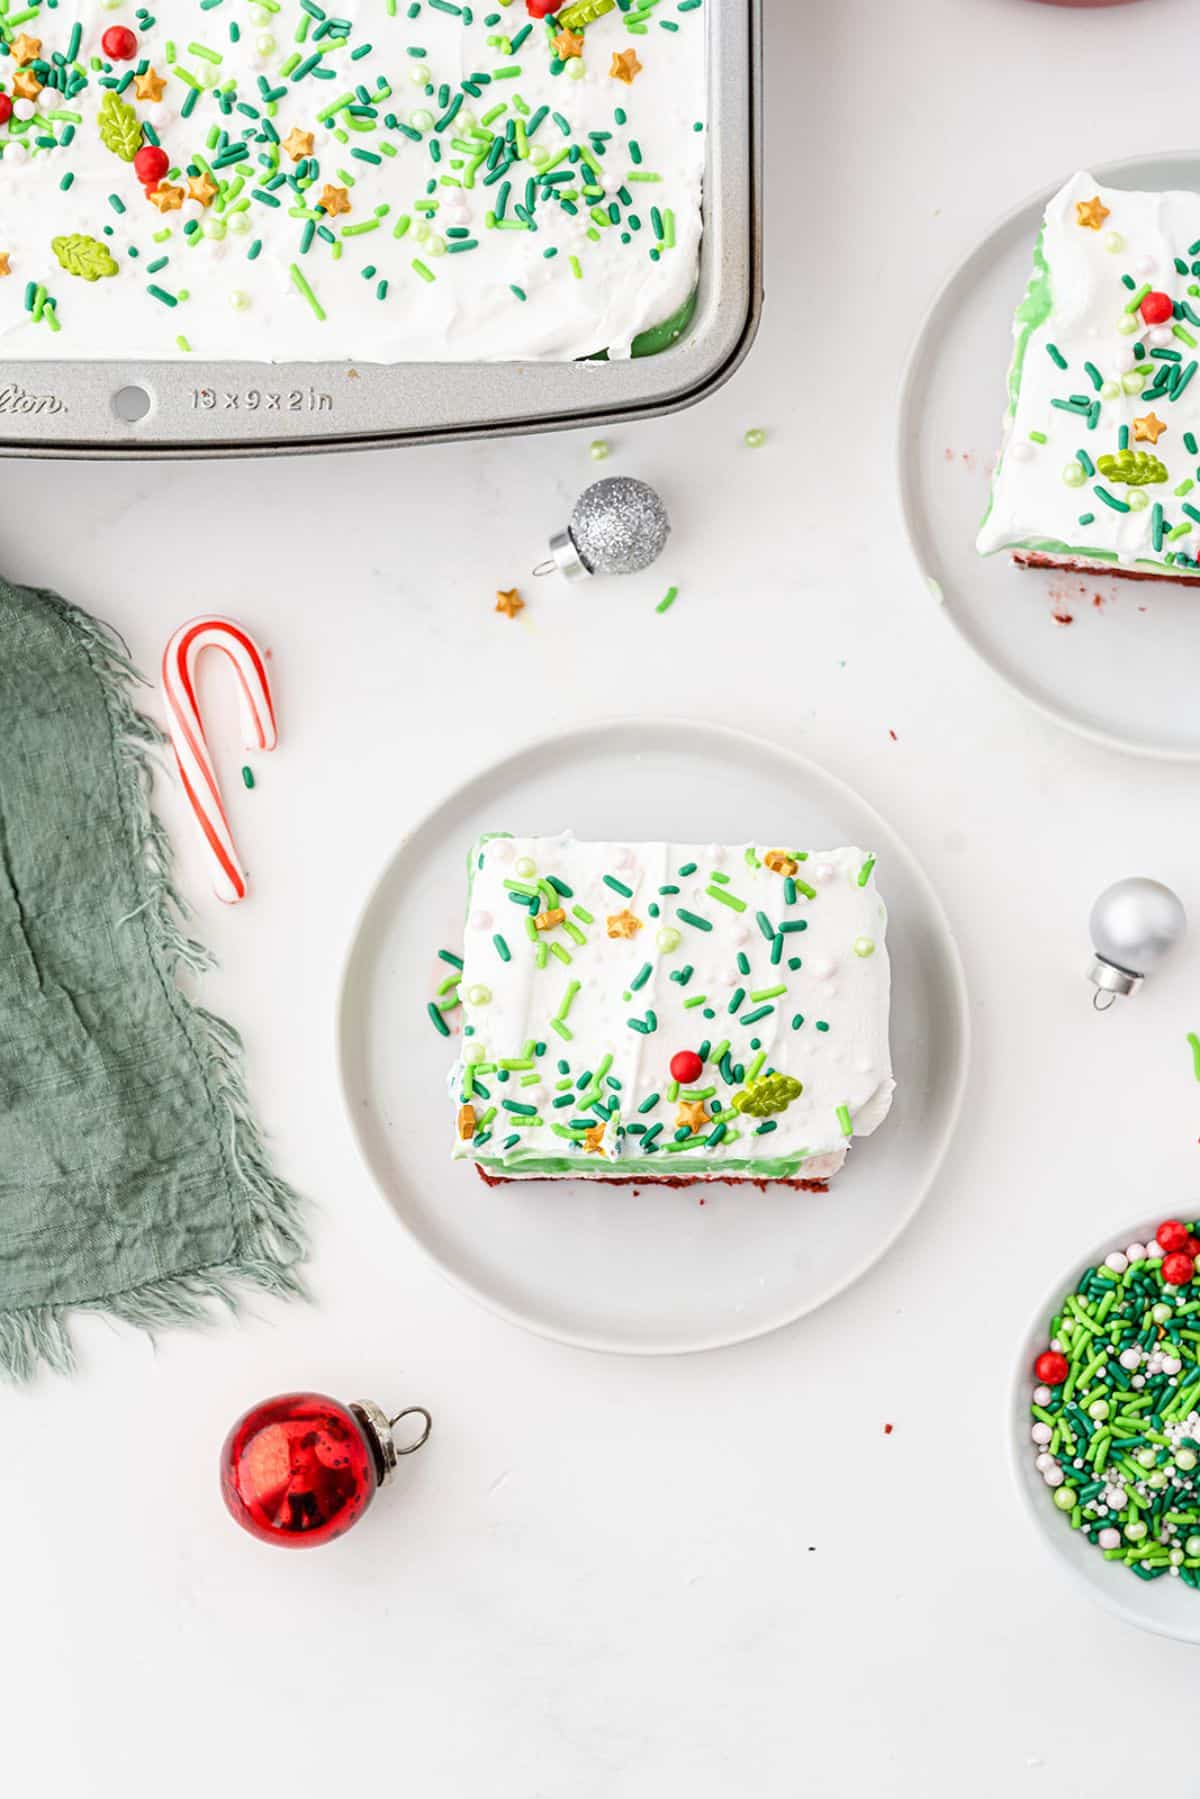 Slice of Christmas Dessert Lasagna on a serving plate with candy canes and other decorations scattered around.